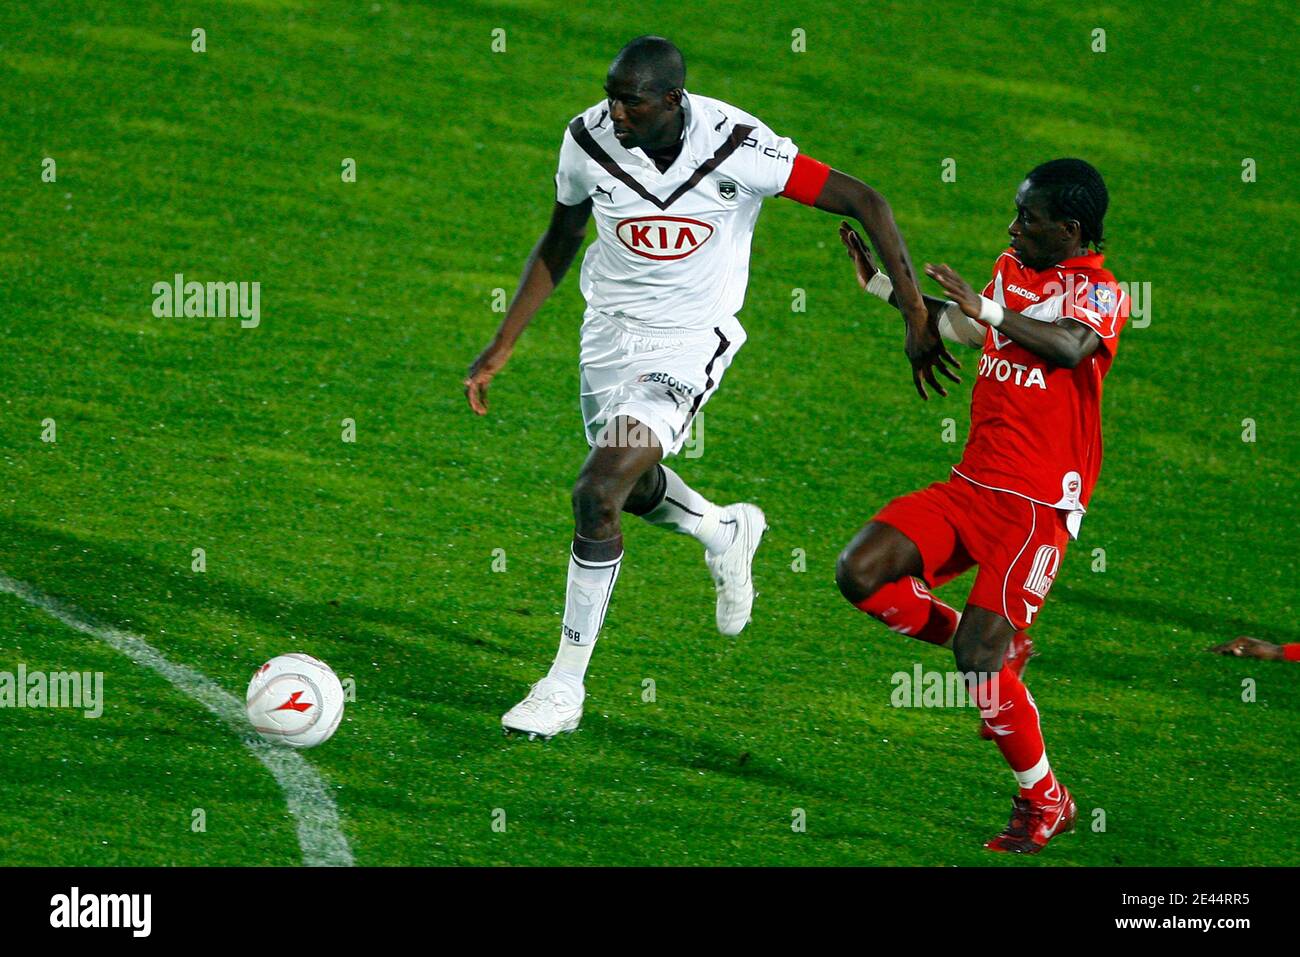 Valenciennes' Bangoura fights for the ball with Bordeaux's Alou Diarra during the French First League soccer match between Valenciennes Football Club (VAFC) and Football Club Girondins de Bordeaux (FCGB) at Nungesser stadium on 13, May 2009. Photo by Mika Stock Photo